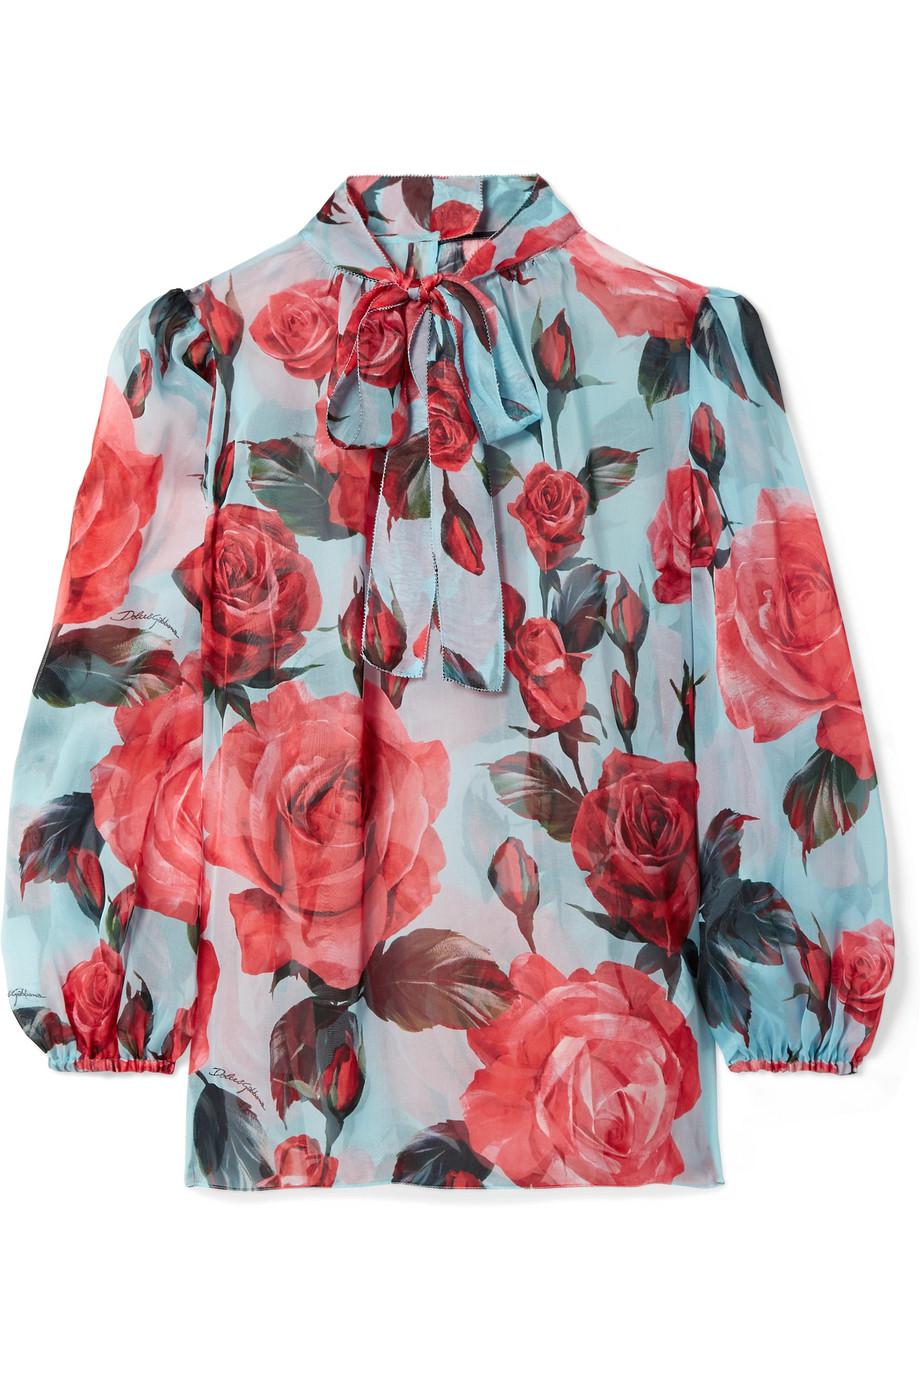 Dolce & Gabbana Pussy-bow Floral-print Silk-chiffon Blouse in Blue | Lyst